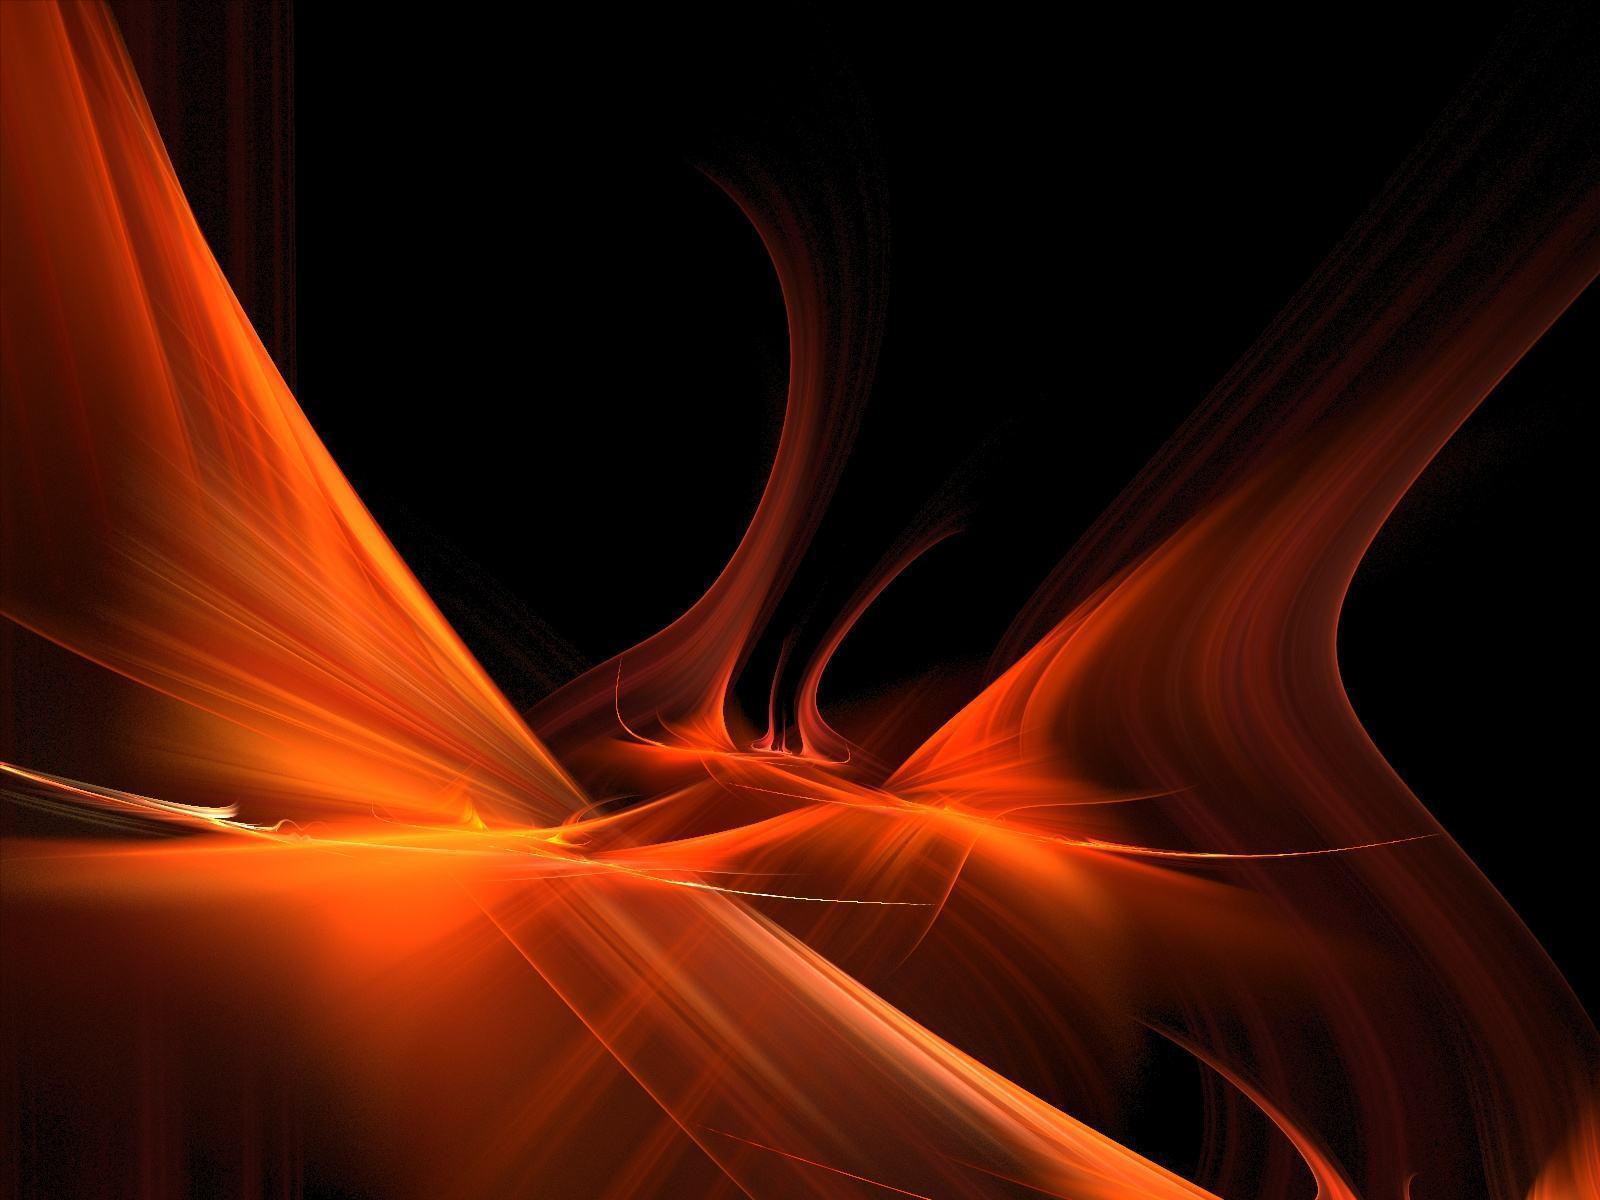 Best Abstract Wallpaper HD Background Abstrac 1600x1200PX